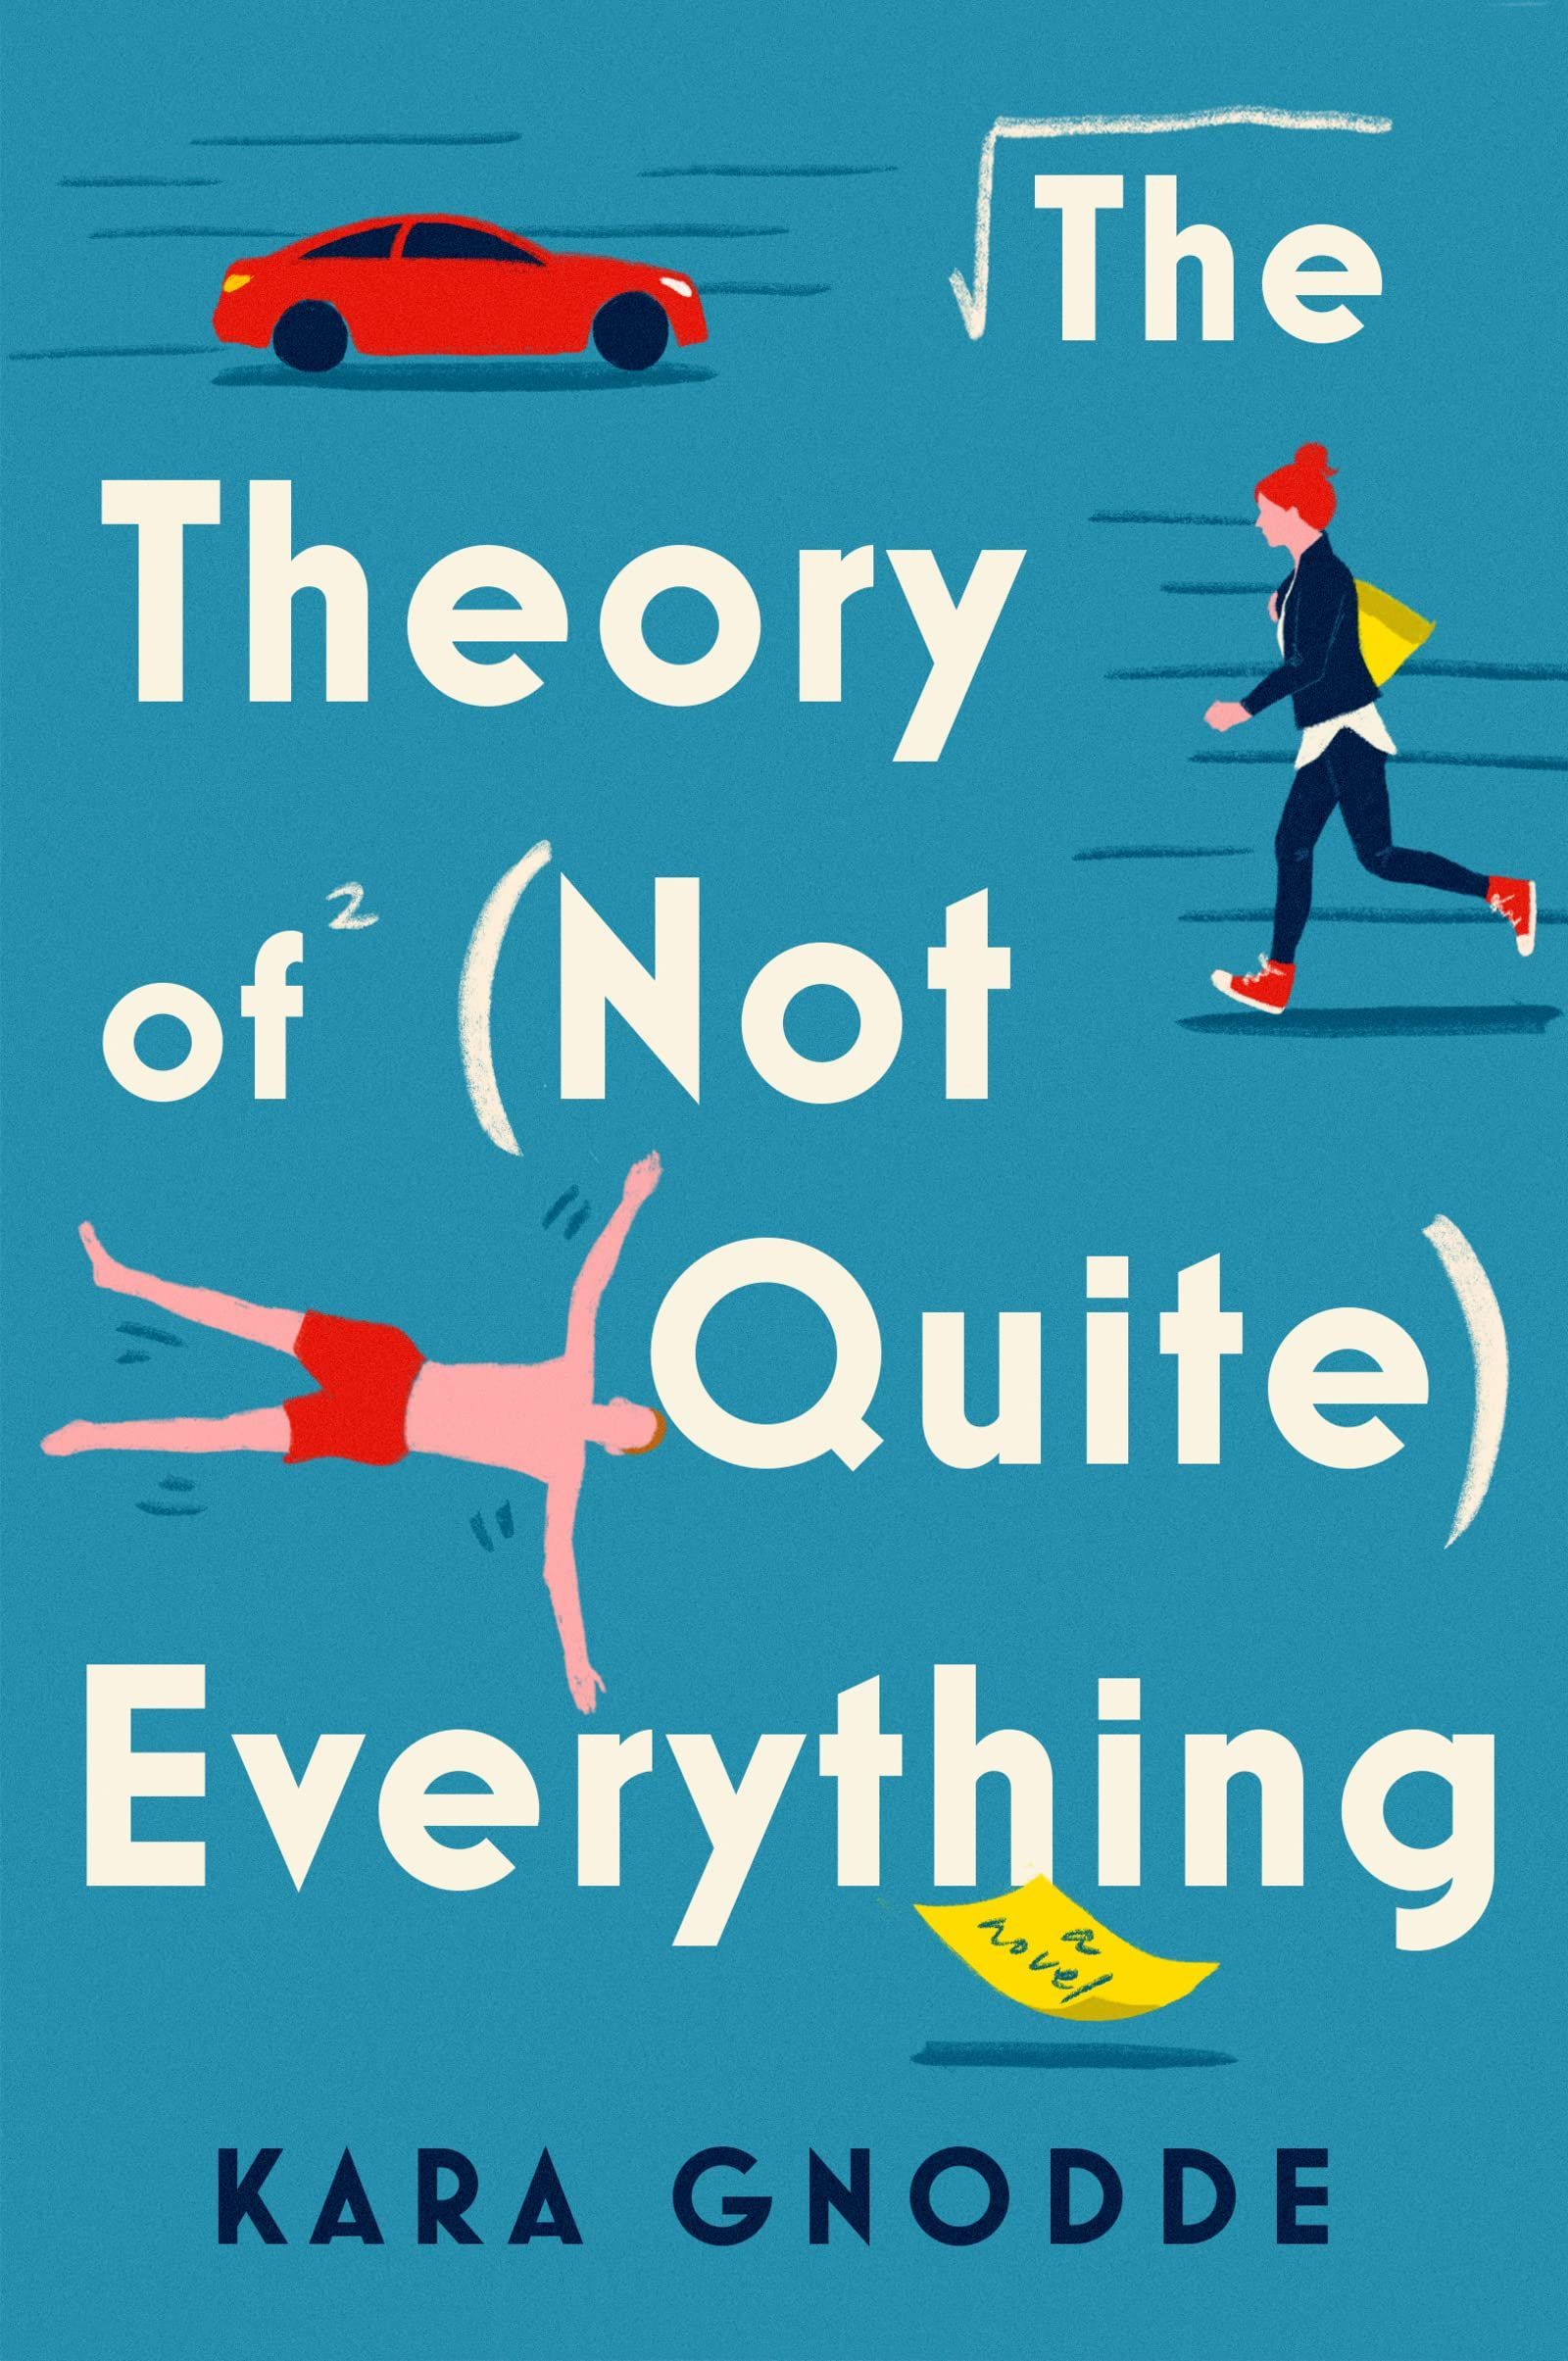 'The Theory of (Not Quite) Everything' by Kara Gnodde